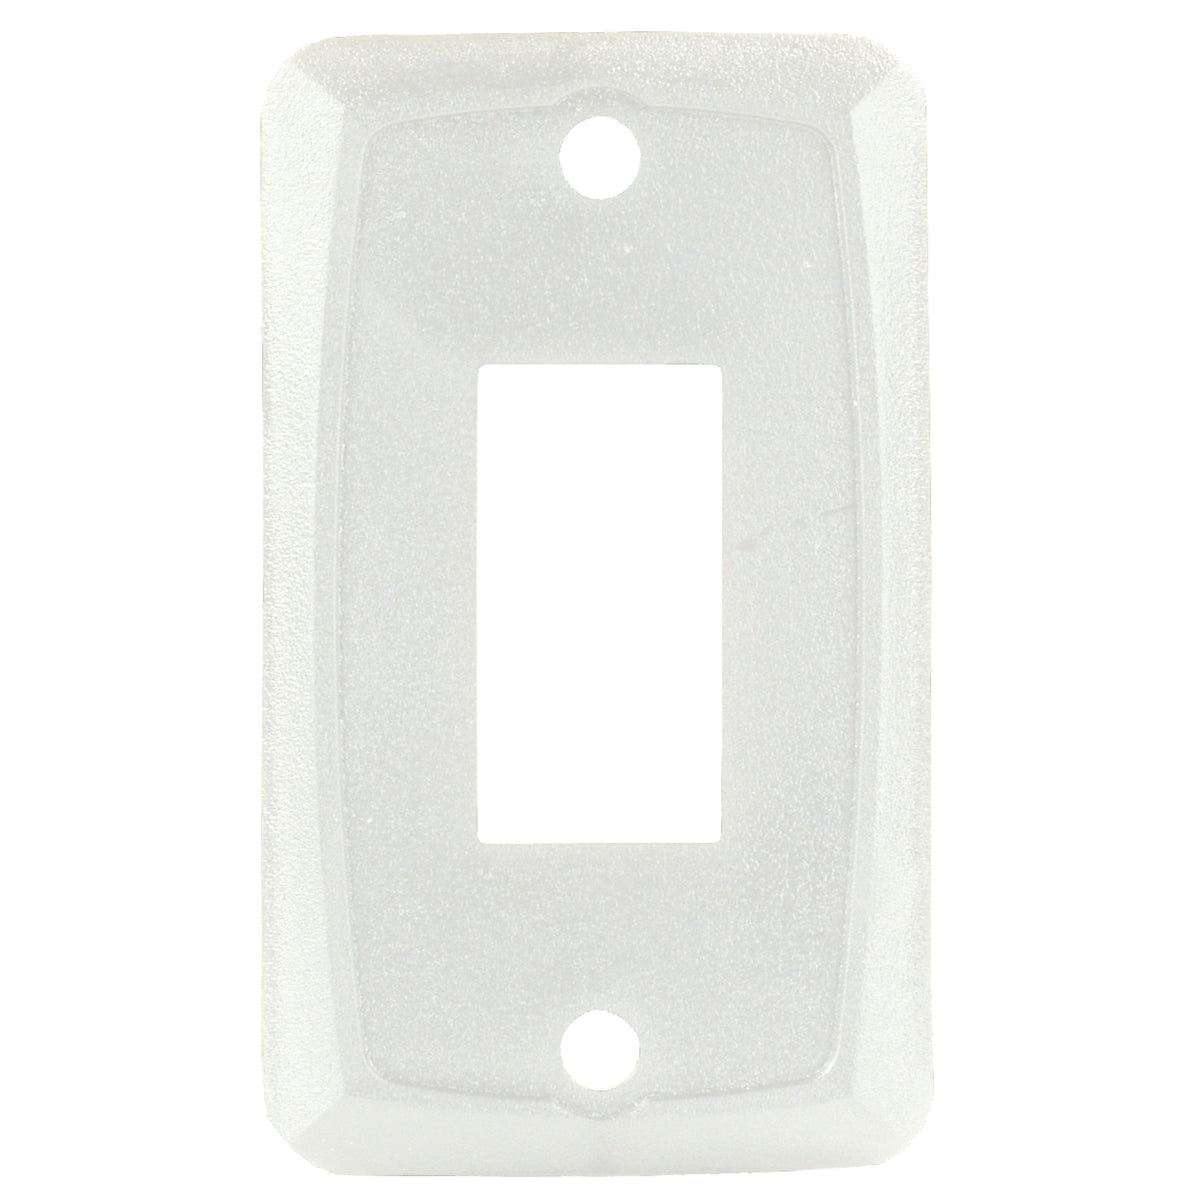 JR Products 12841-5 Single Face Plate, Pack of 5 - White